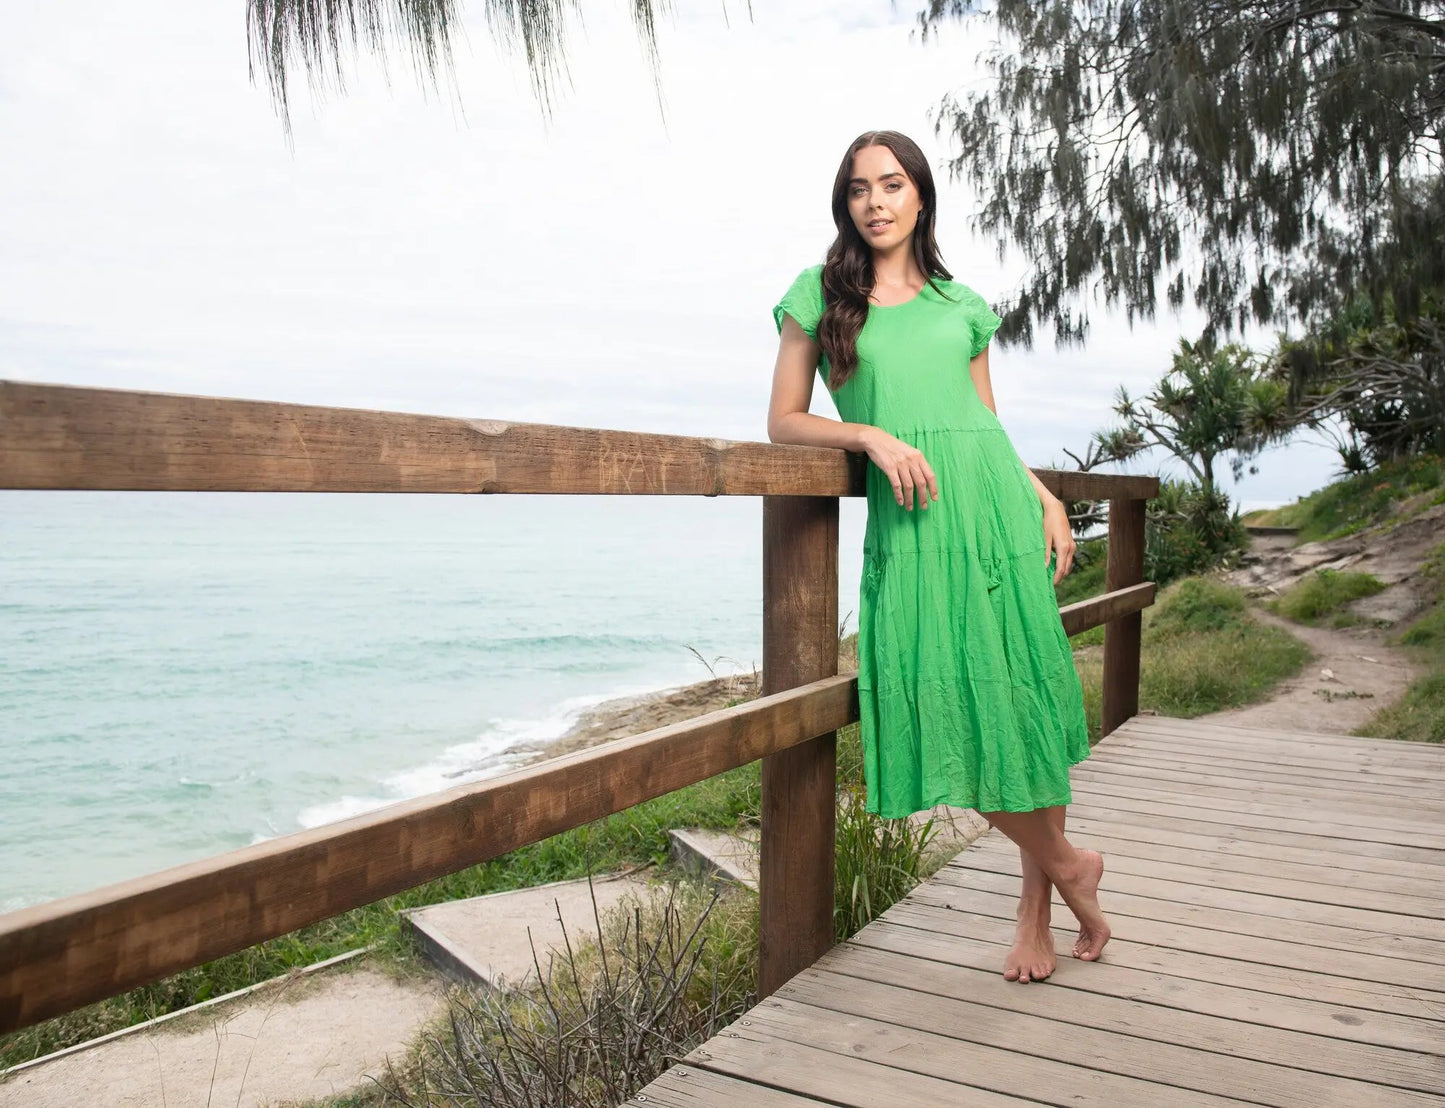 A woman in an Orientique Essentials Dress Front Pocket leans on a wooden fence along a beachside boardwalk, with a turquoise sea and overcast sky in the background.